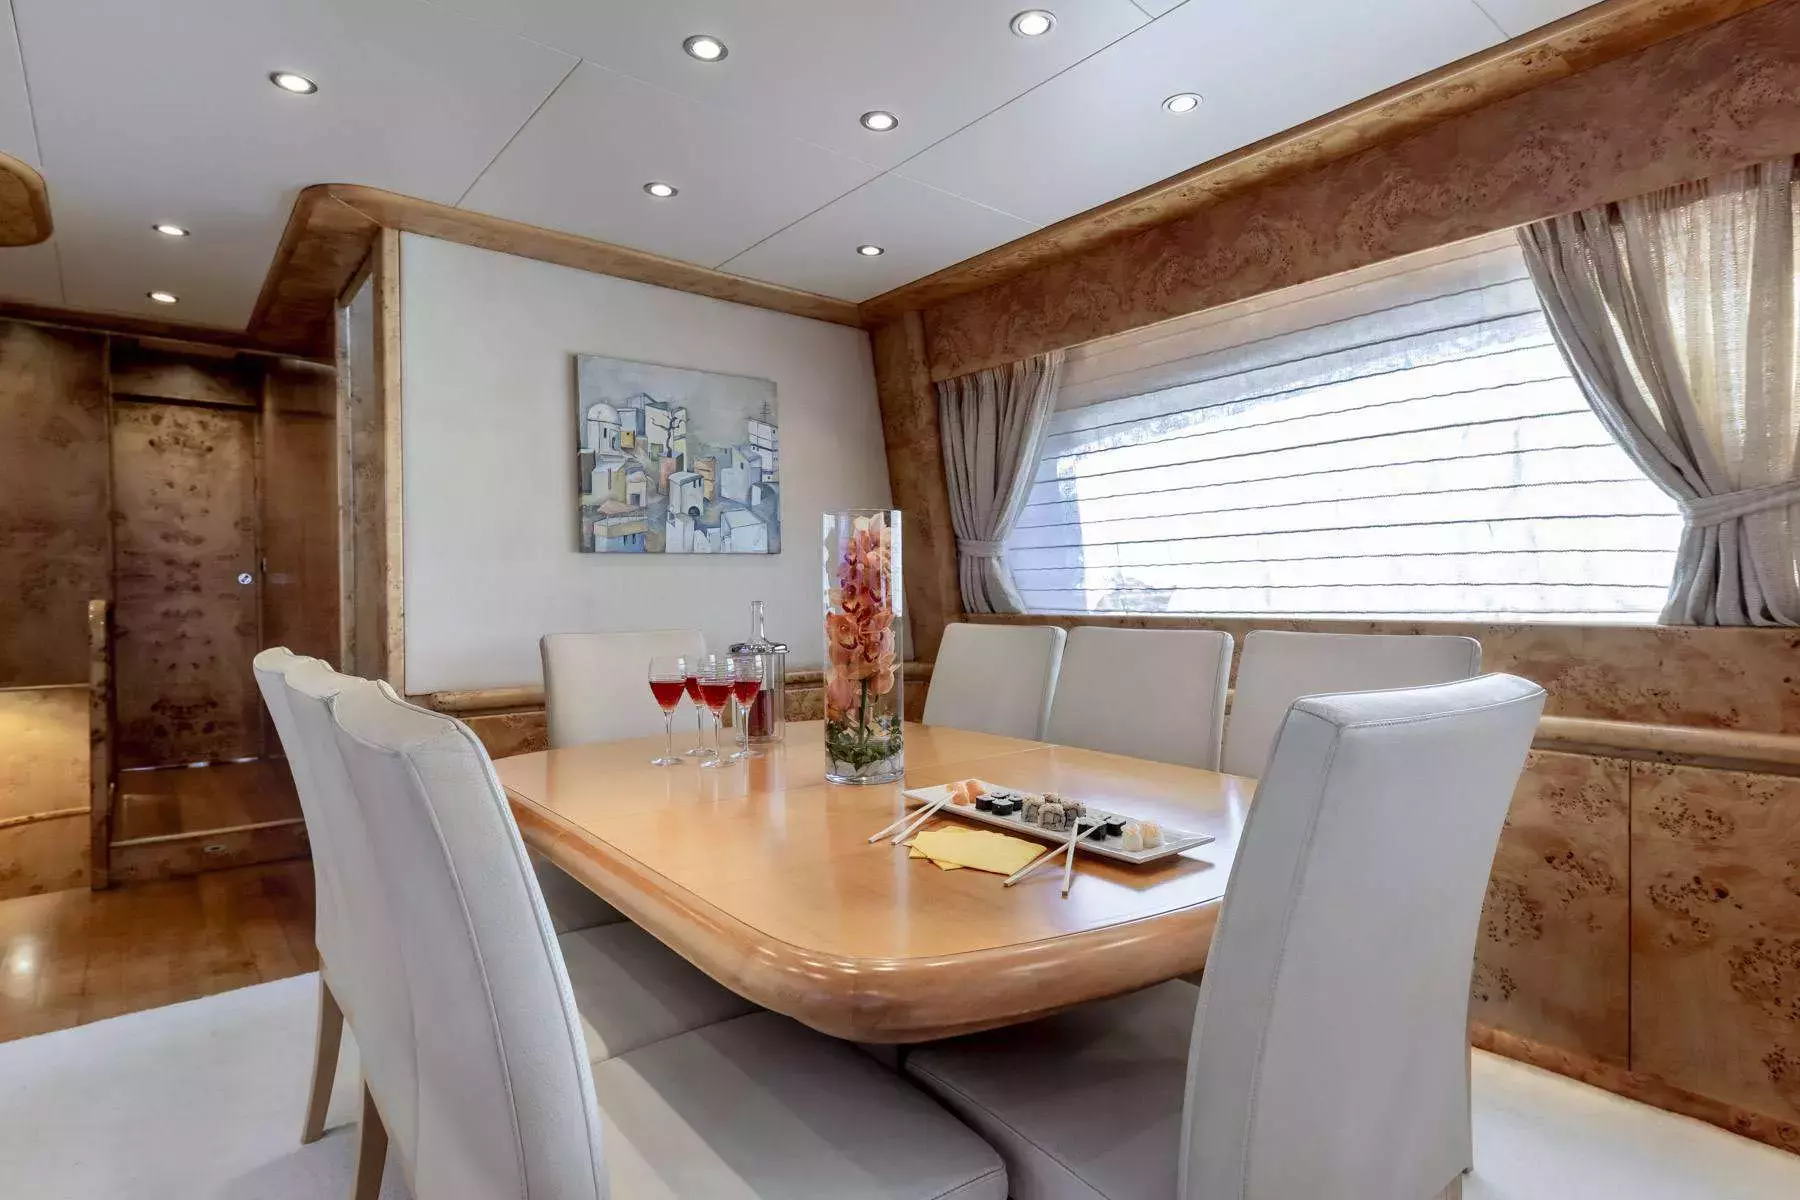 Andilis by Admiral - Top rates for a Charter of a private Motor Yacht in Greece